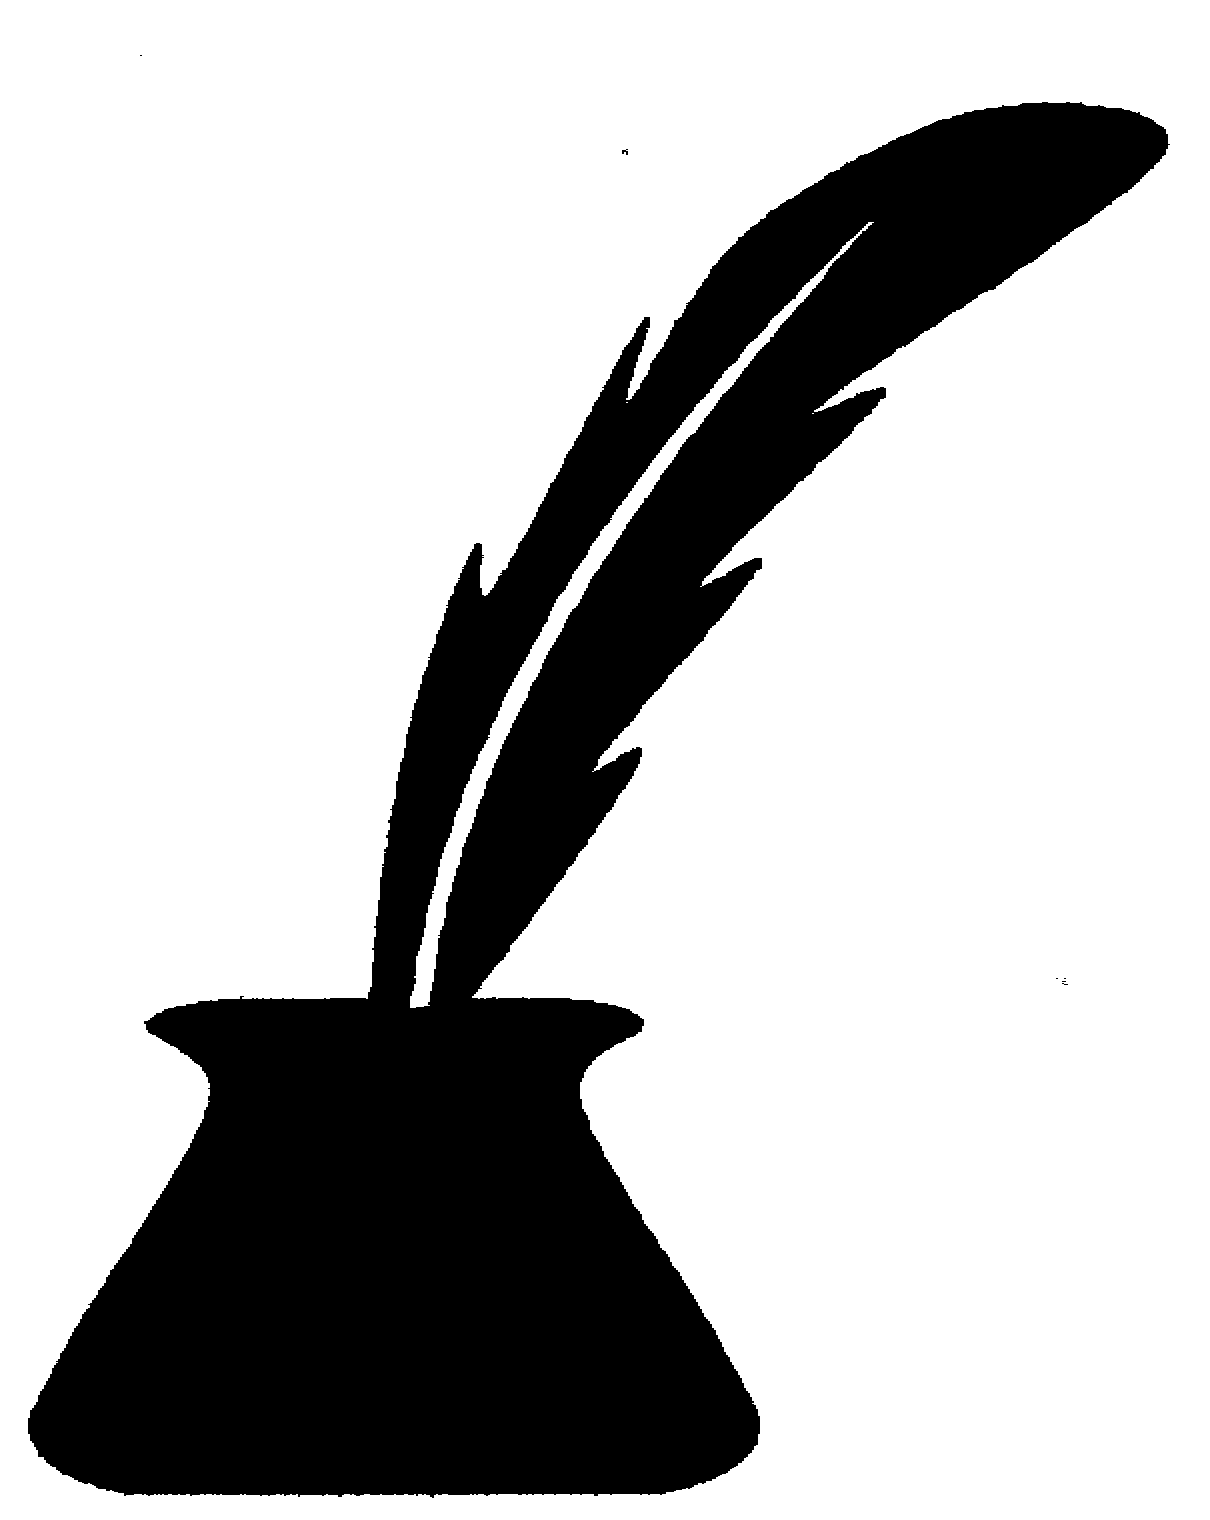 Feather pen clipart free clipart images